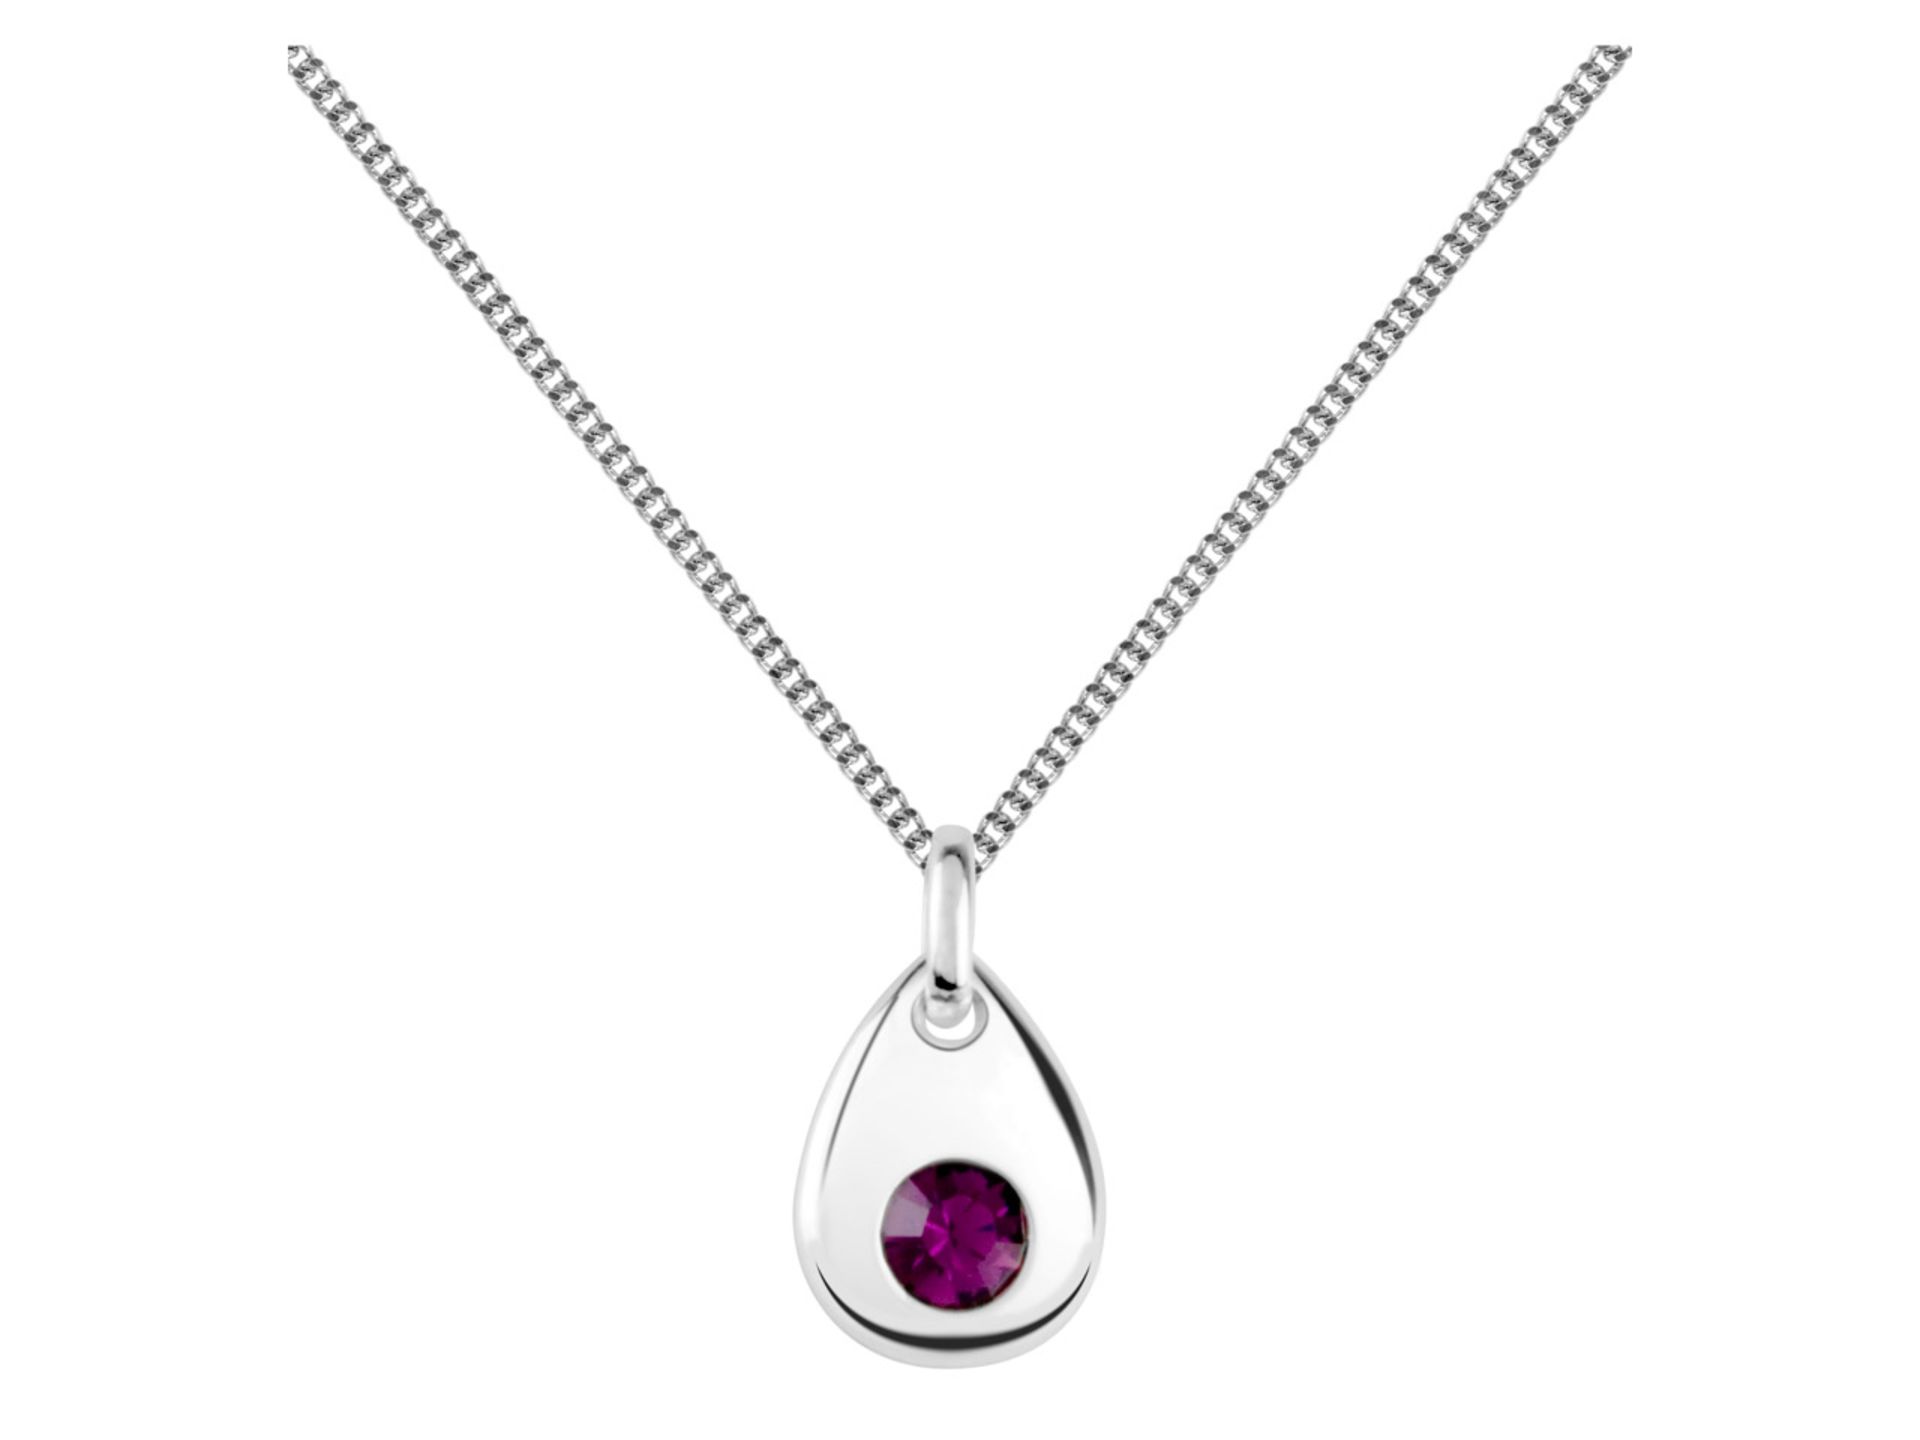 Sterling Silver Pendant June Birthstone 4mm Light Amethyst Crystal - Valued By AGI £425.00 - A 4mm - Image 3 of 4